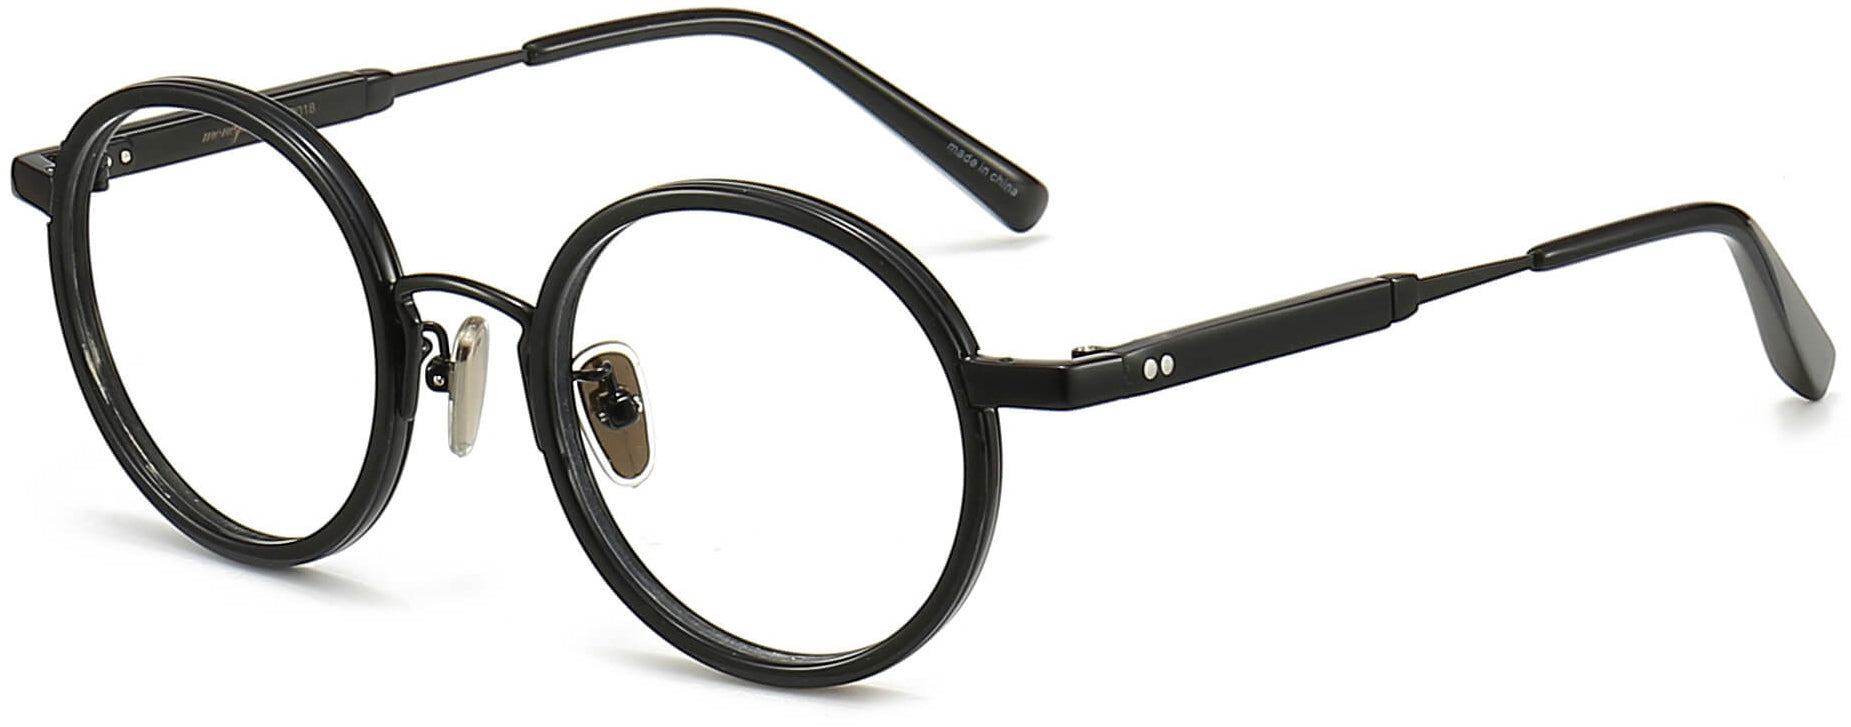 Vicente Round Black Eyeglasses from ANRRI, angle view